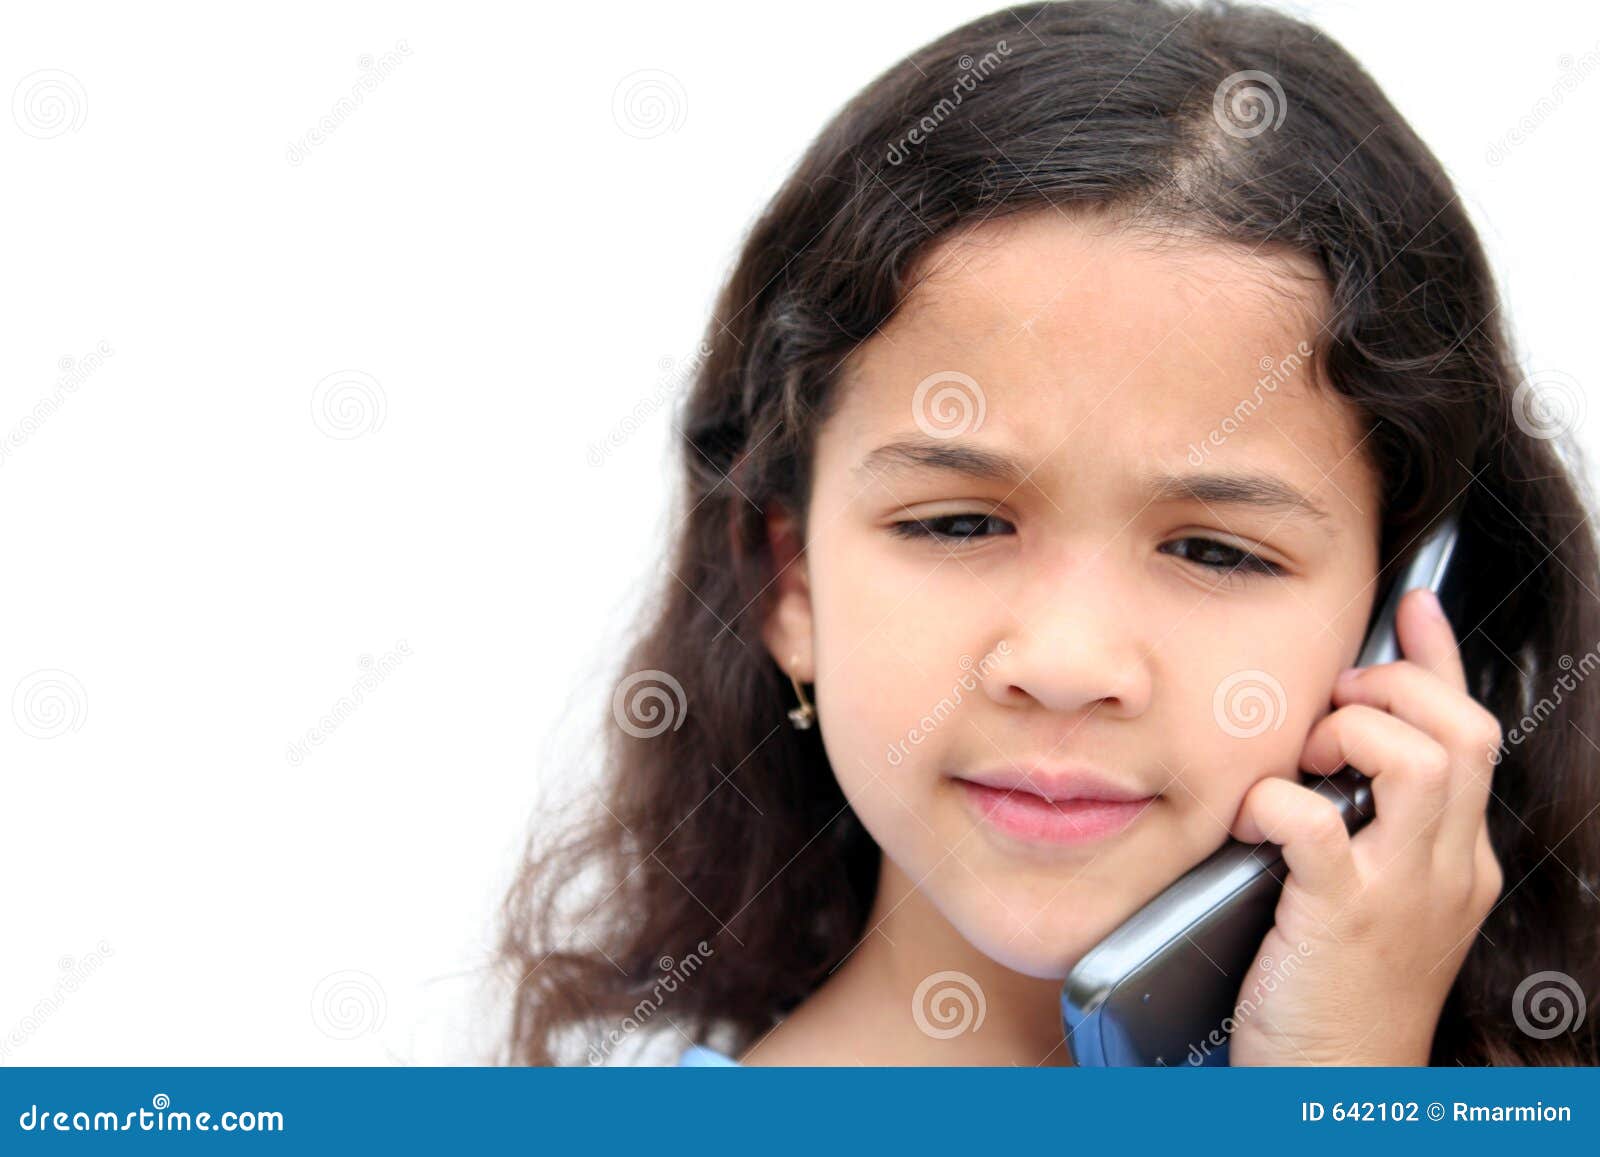 Girl Talking On Cell Phone - girl-talking-cell-phone-642102